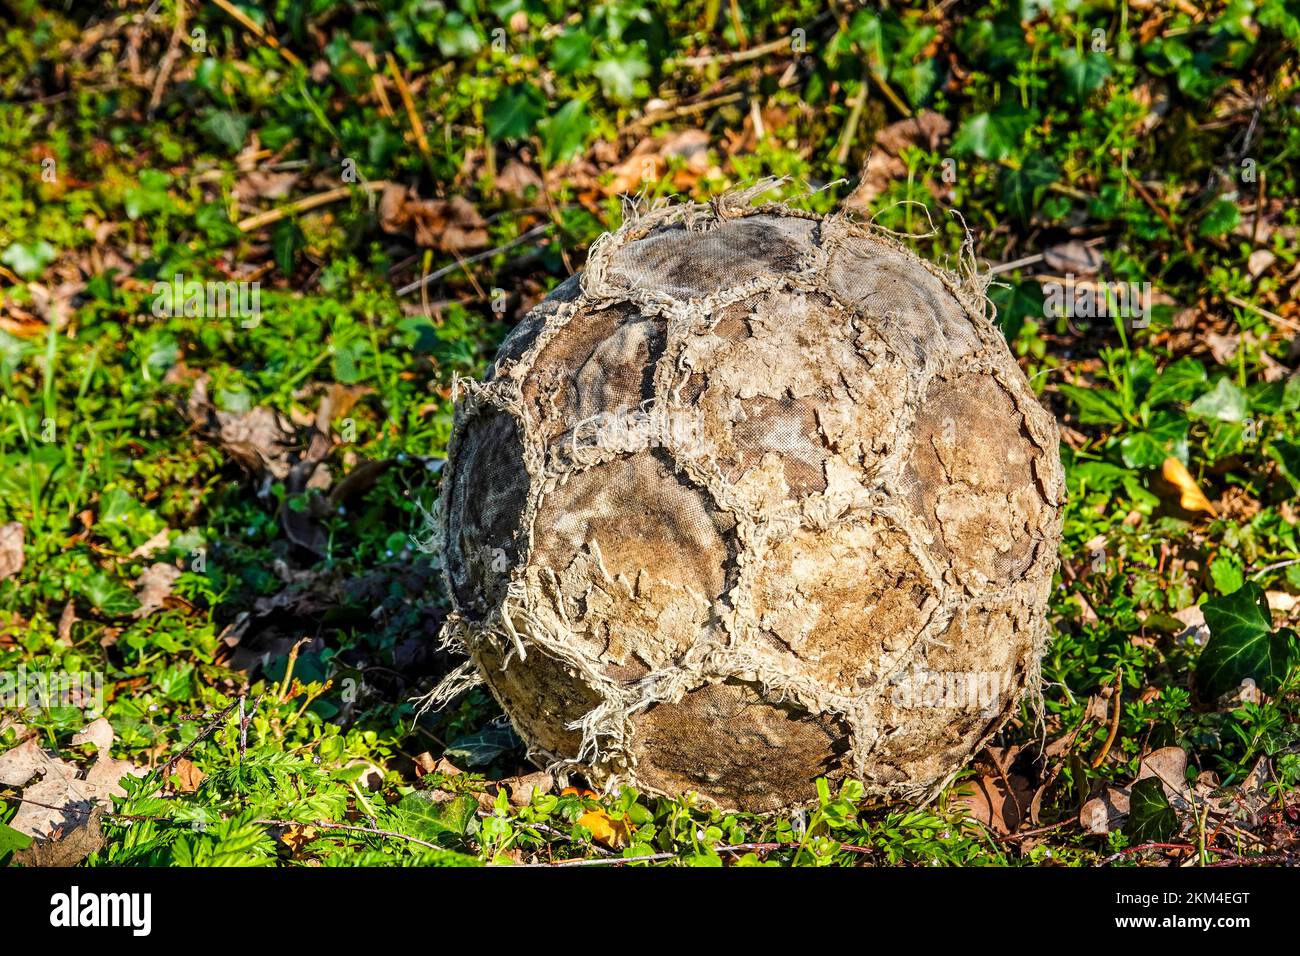 Old, totally worn out soccer ball or football Stock Photo